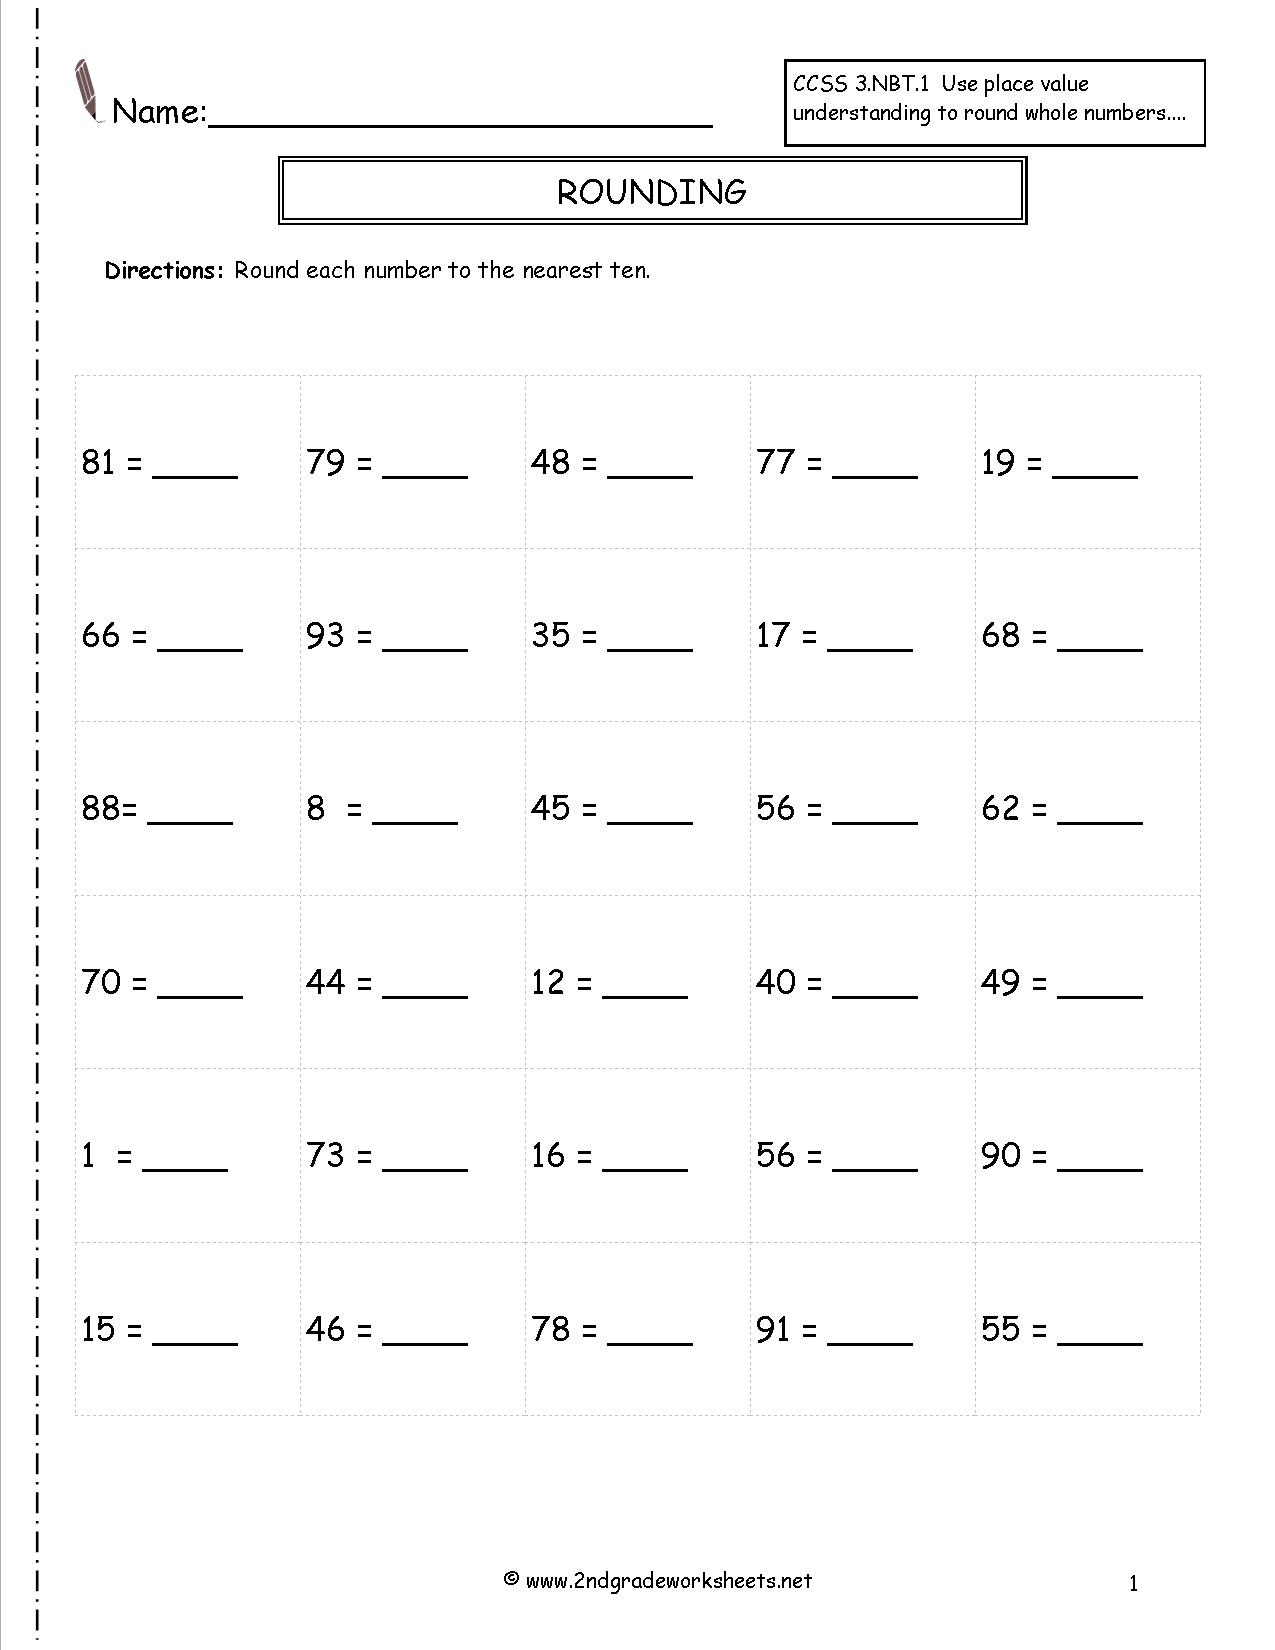 Rounding Whole Numbers Worksheets Printable